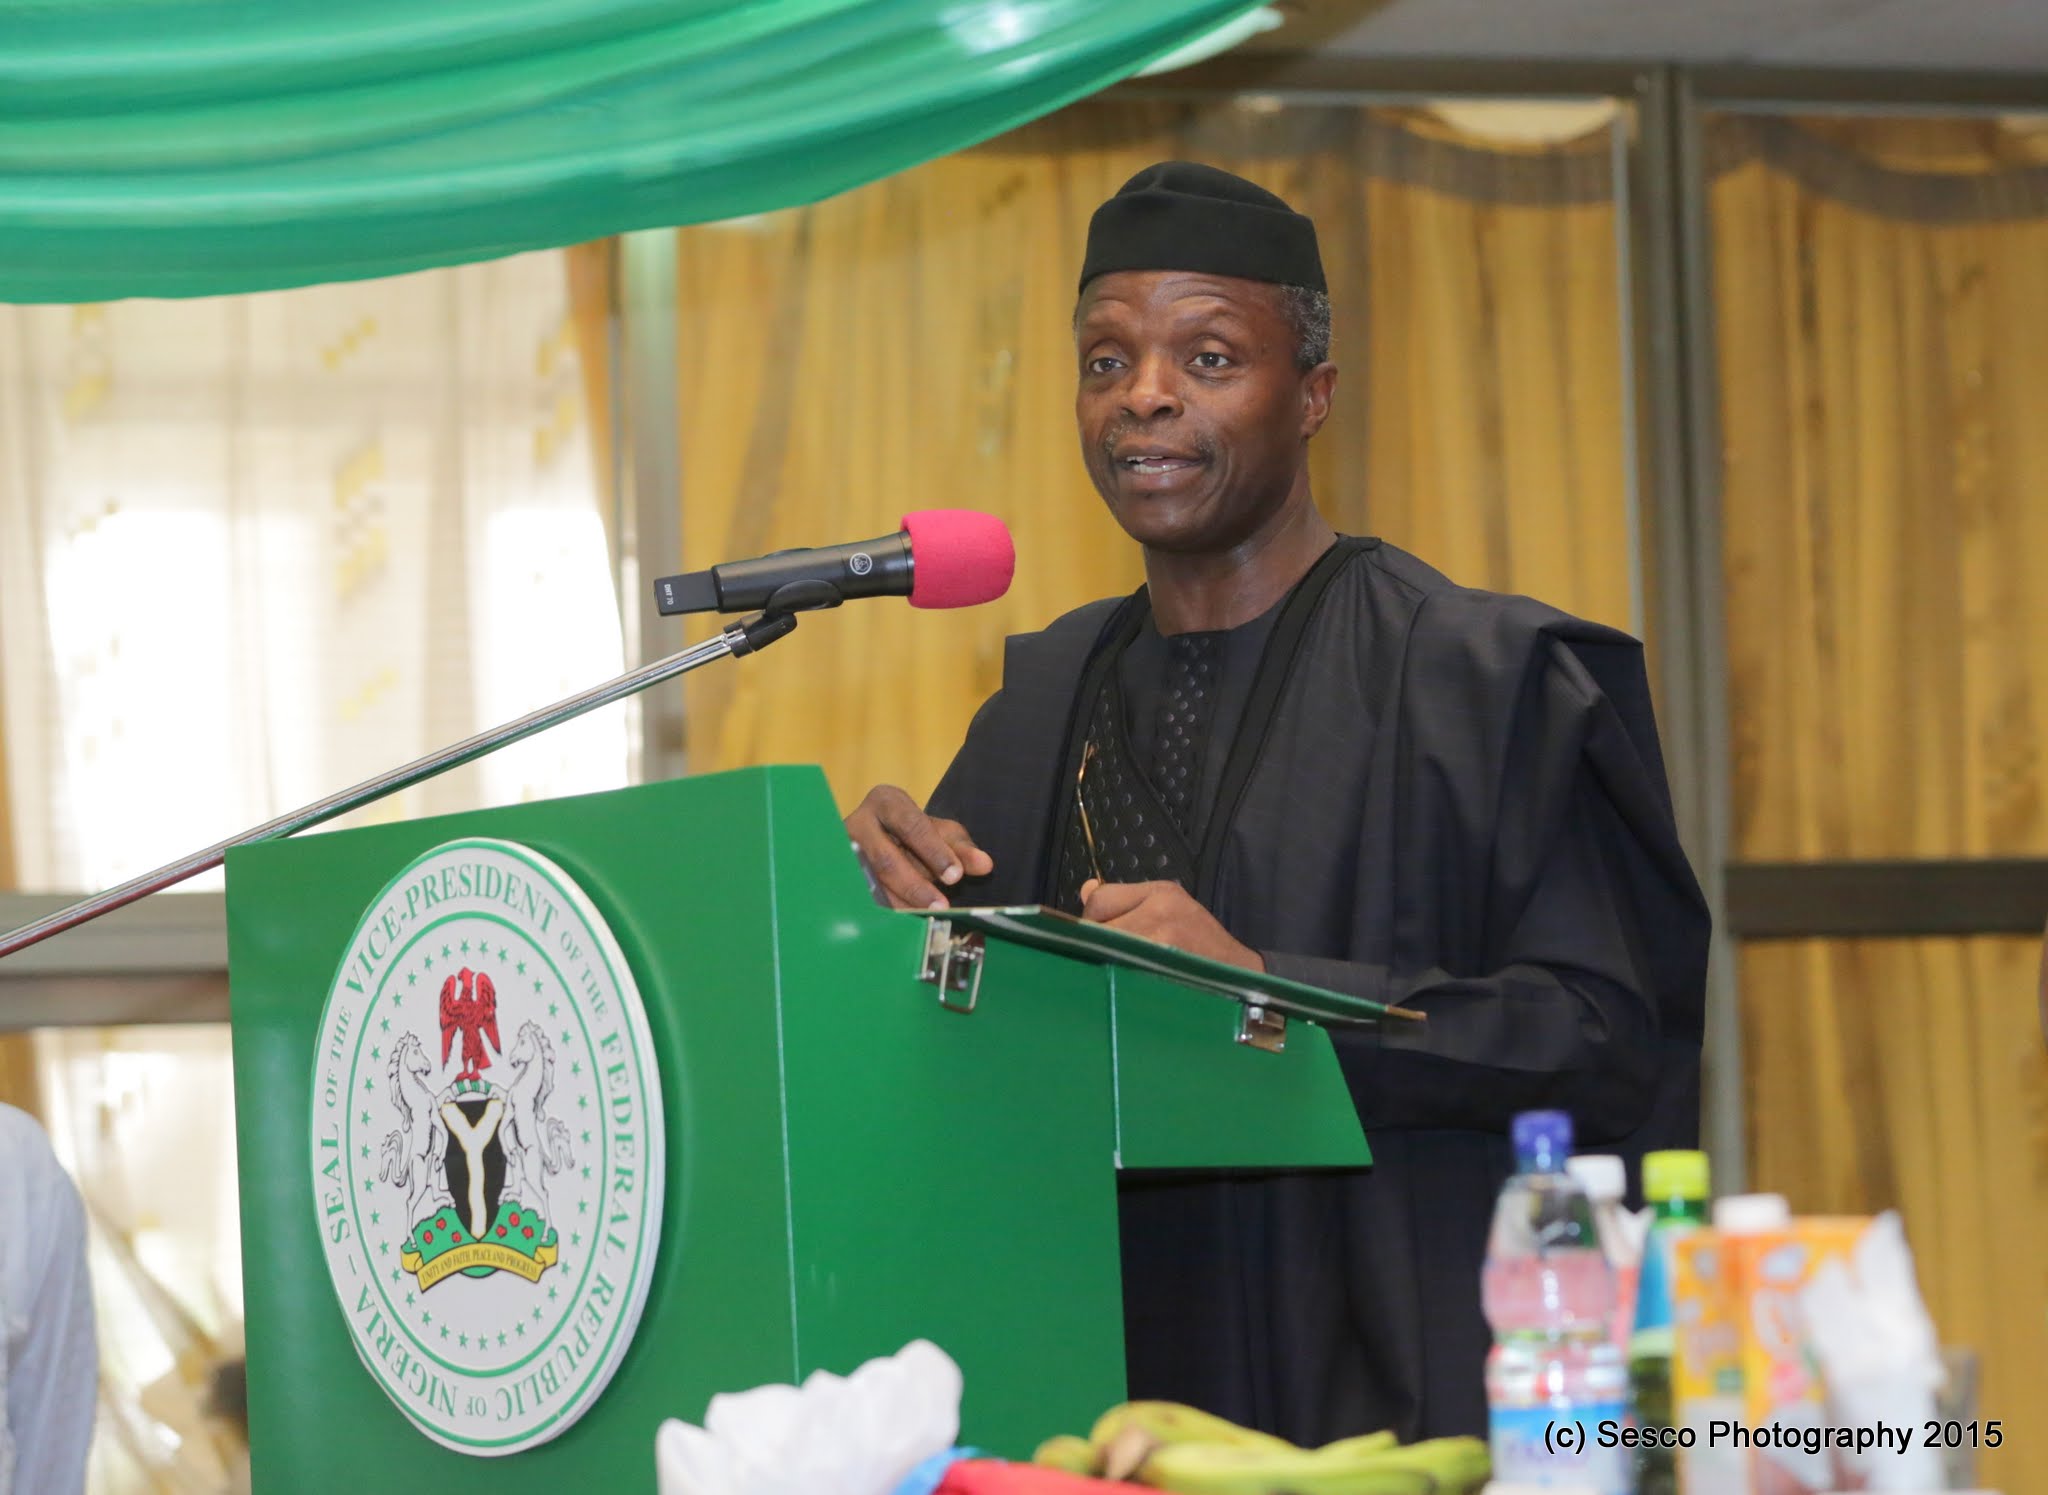 VP Osinbajo Attends Lunch Organised By Kano State Government In Honour Of Mallam Garba Shehu On 08/08/2015